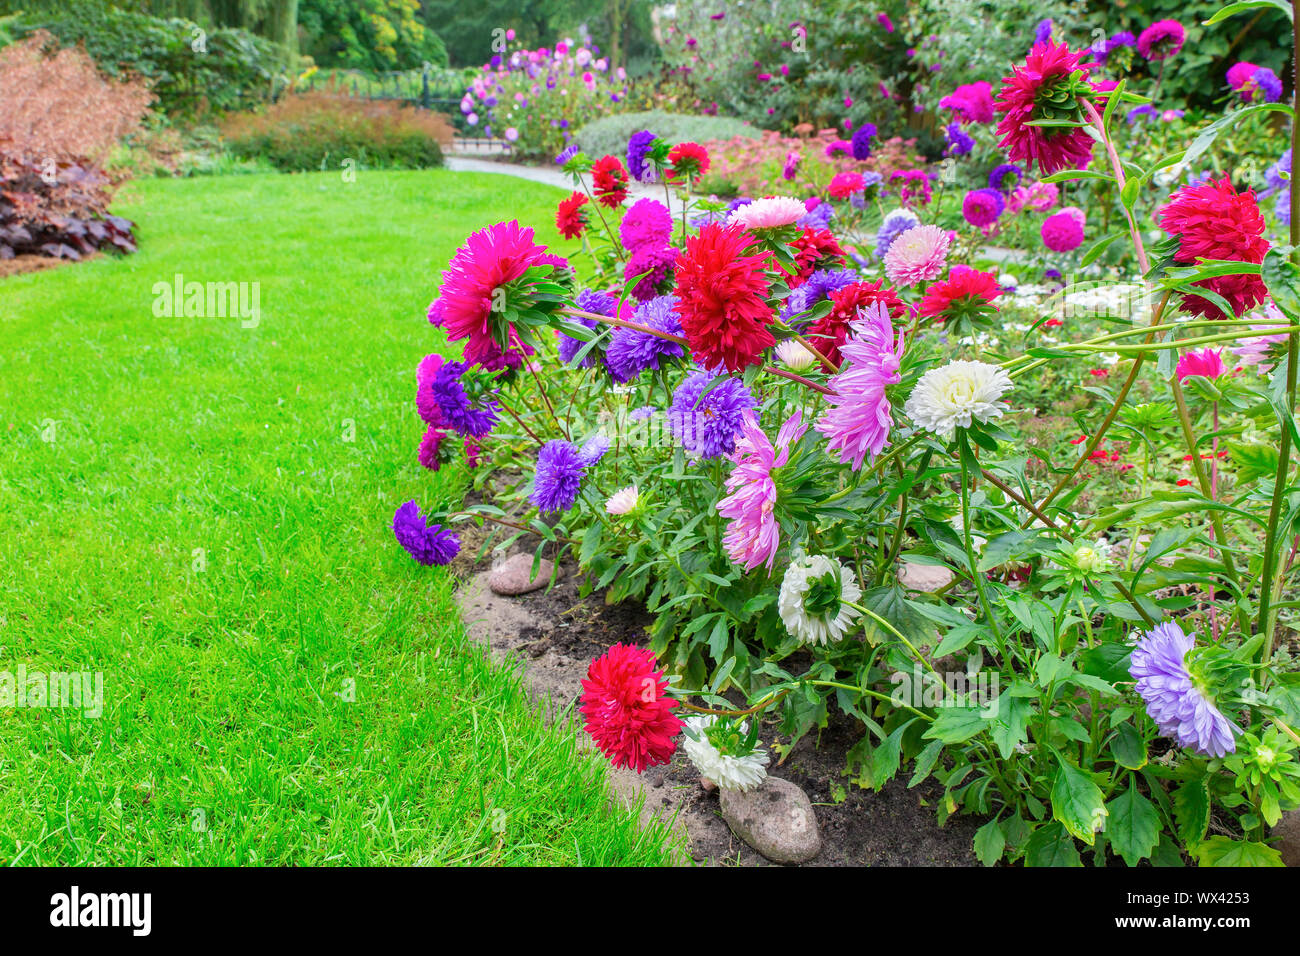 Backyard with blooming Callistephus flowers and lawn Stock Photo